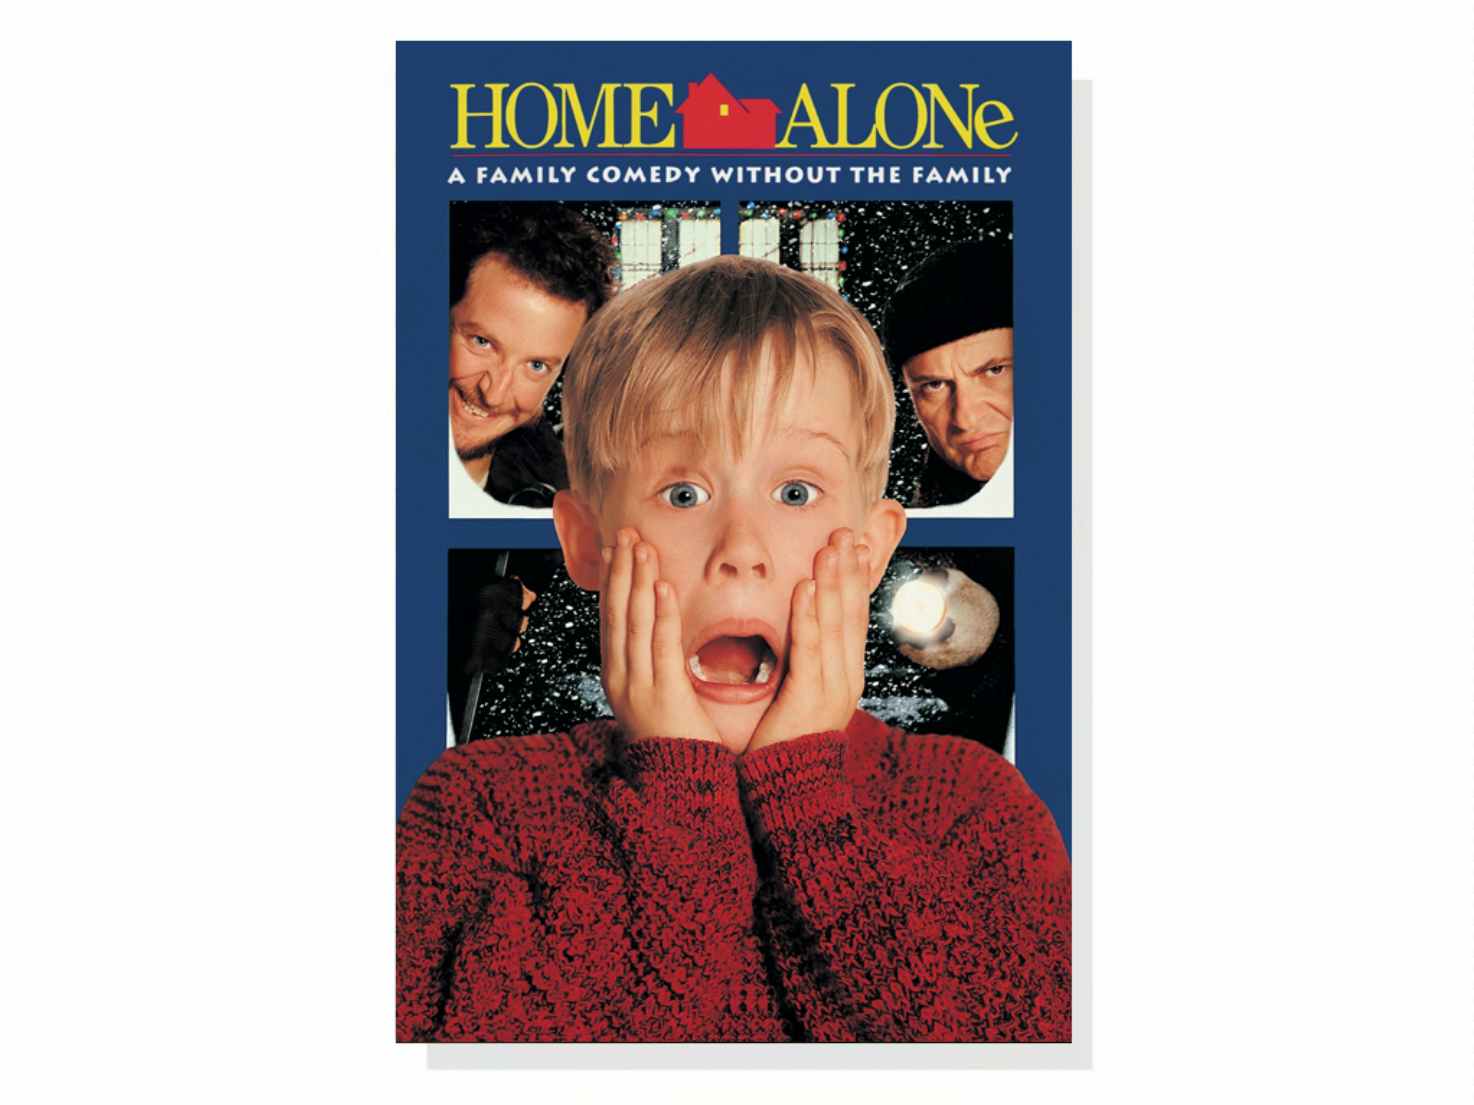 Movie poster for Home Alone, one of the best Christmas movies on Disney Plus.